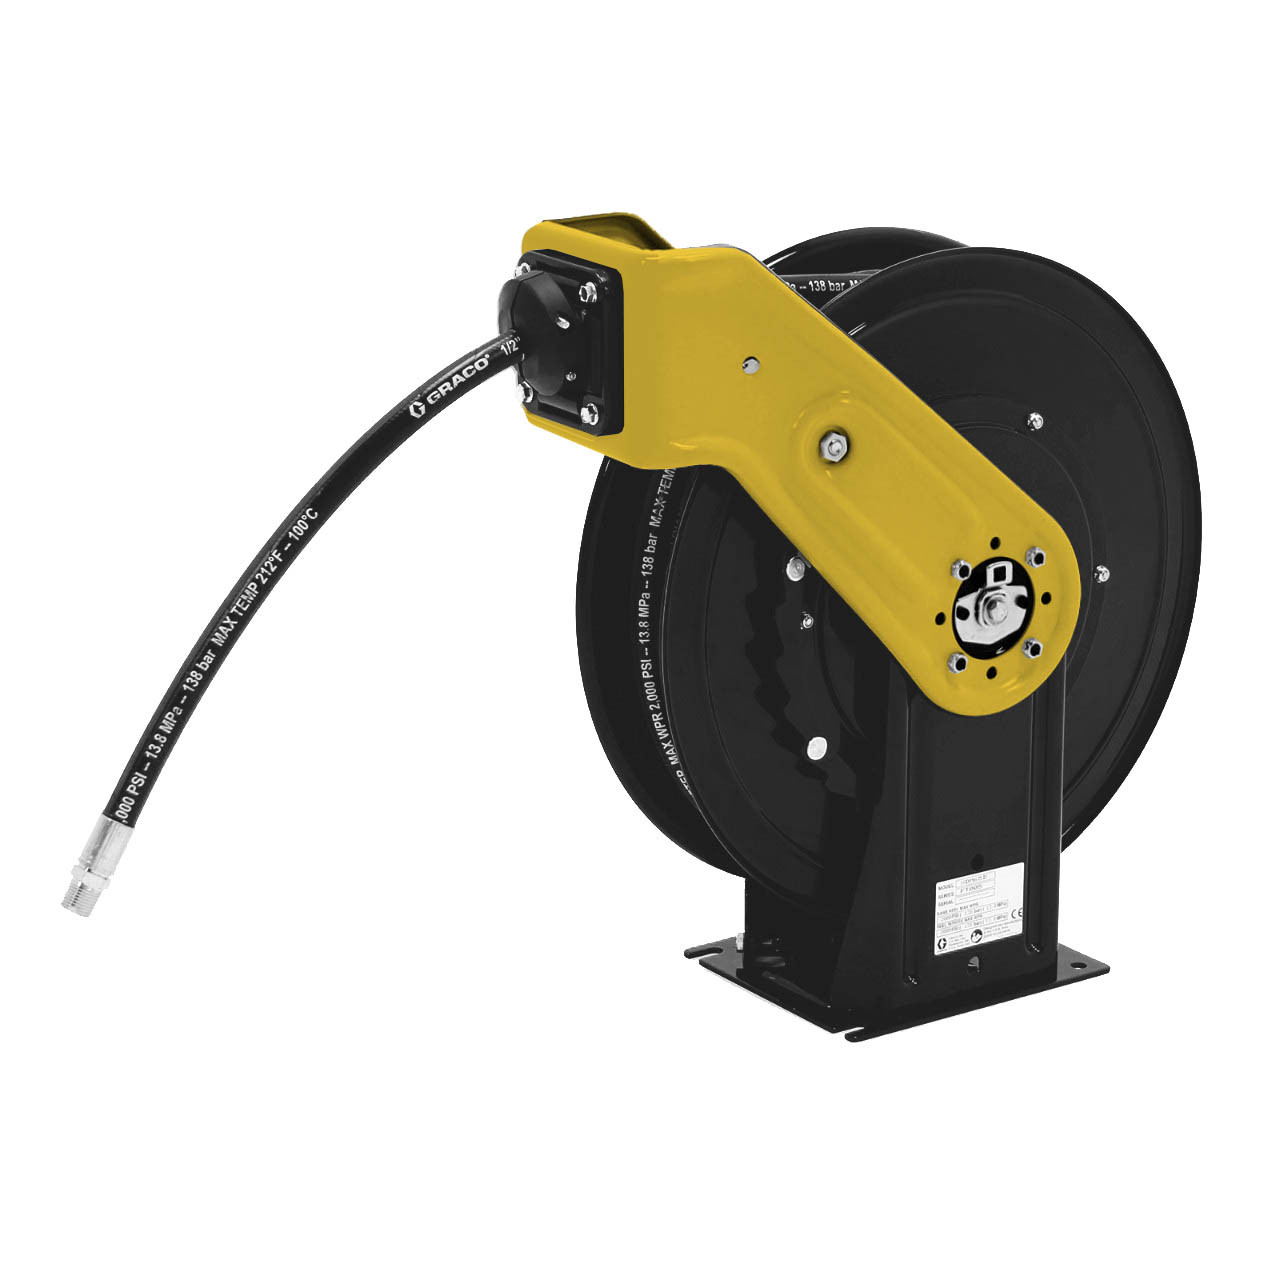 Graco SDL2DF - SDX10, Bare Air/Water Hose Reel 3/8 x 50' Overhead Mount, Yellow by FastoolNow